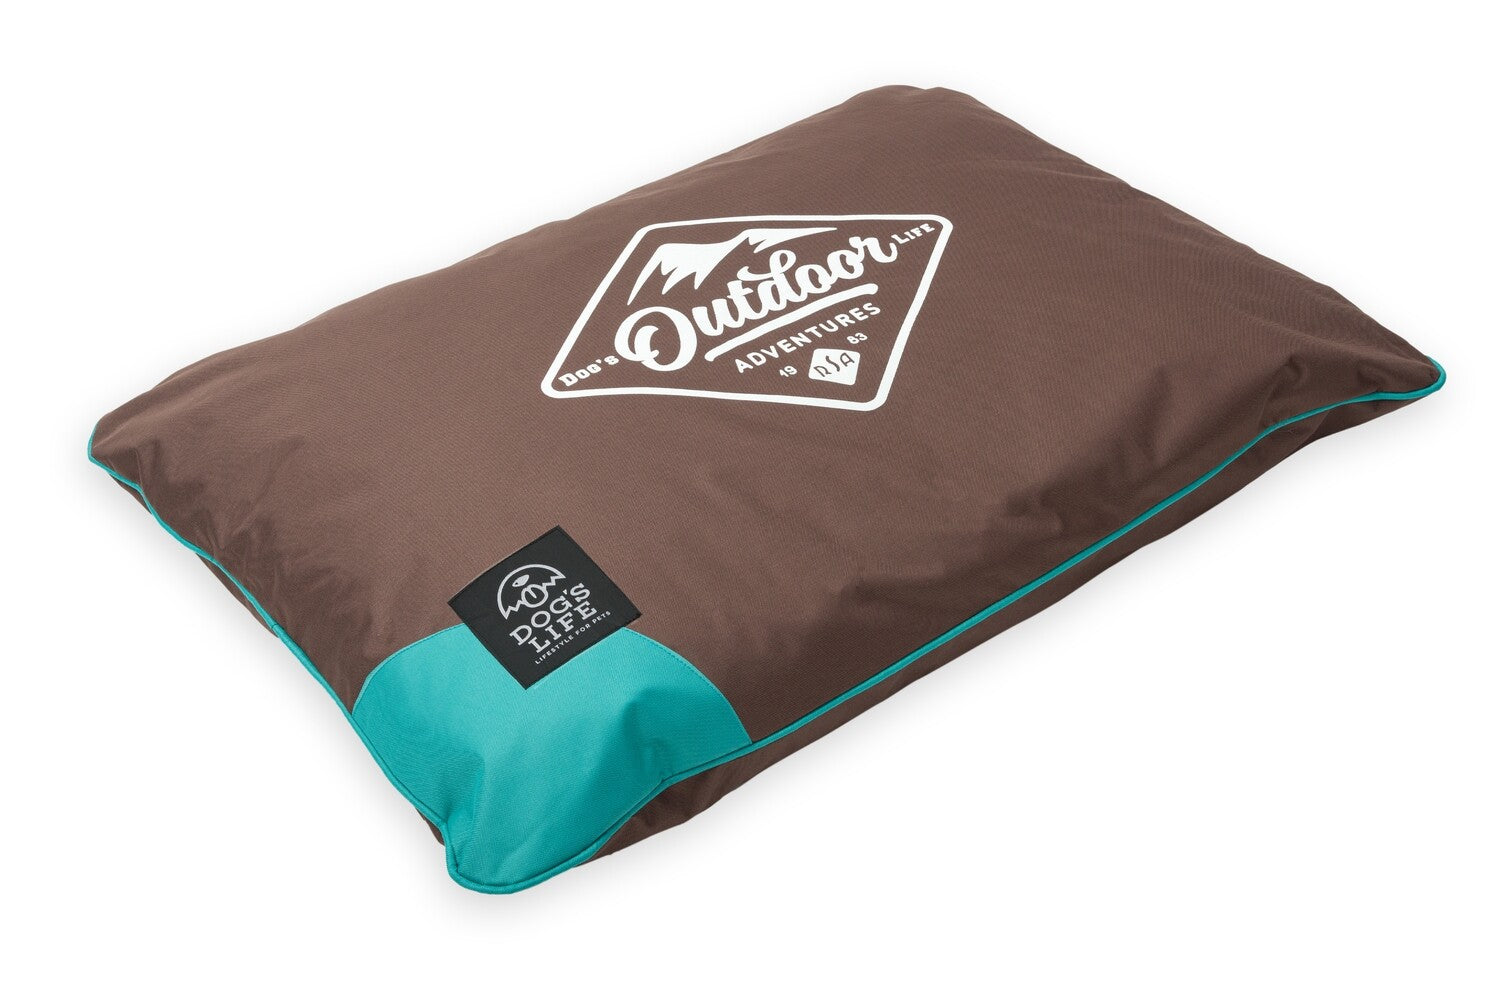 Dog's Life Outdoor Adventures Cushion - Brown